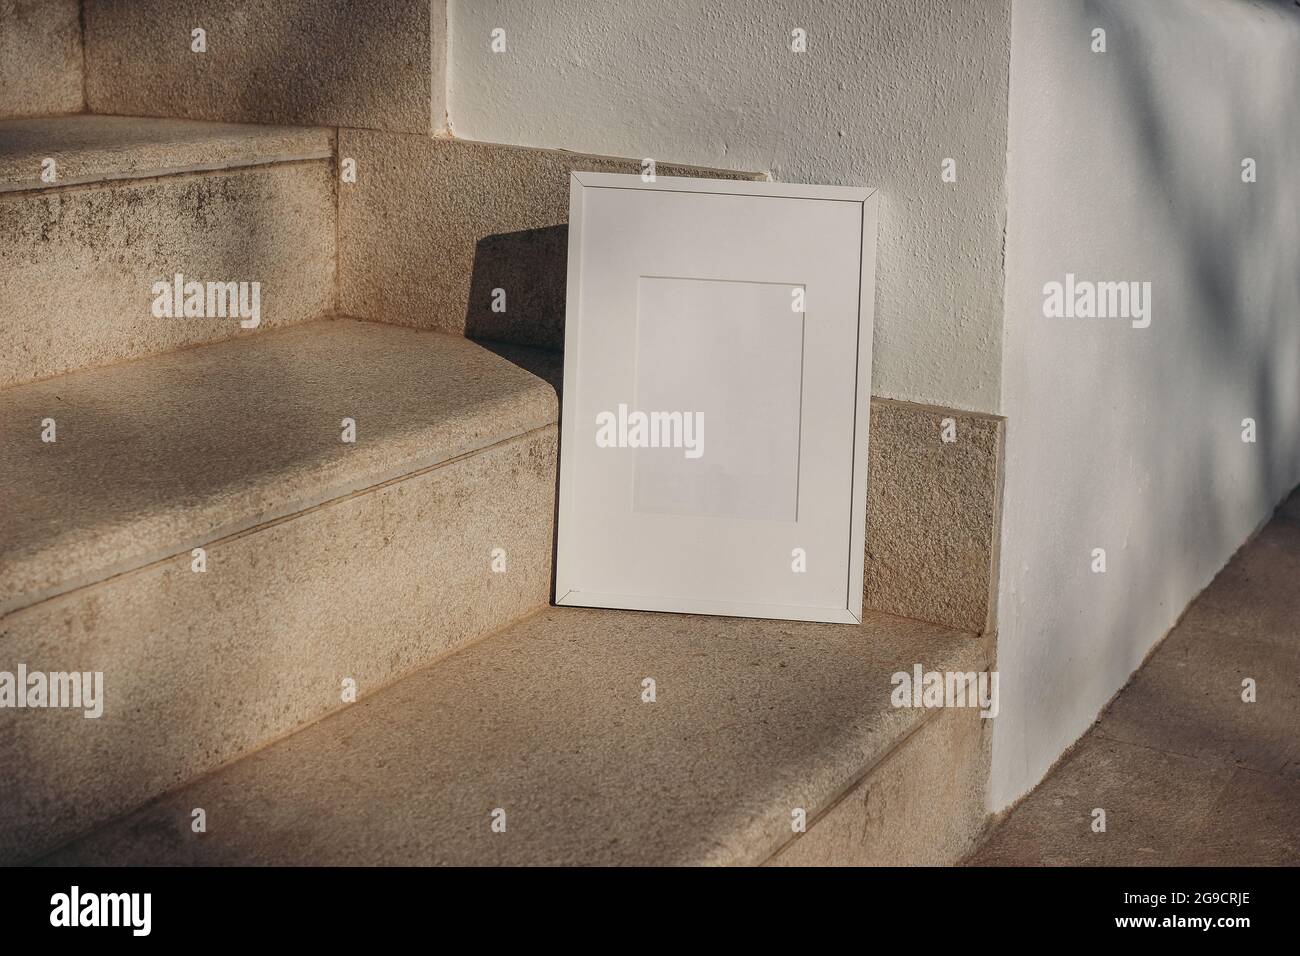 Blank white picture frame leaning against white wall. Outdoor sandstone stairs in sunlight, shadows overlay. Empty poster mockup for art display Stock Photo